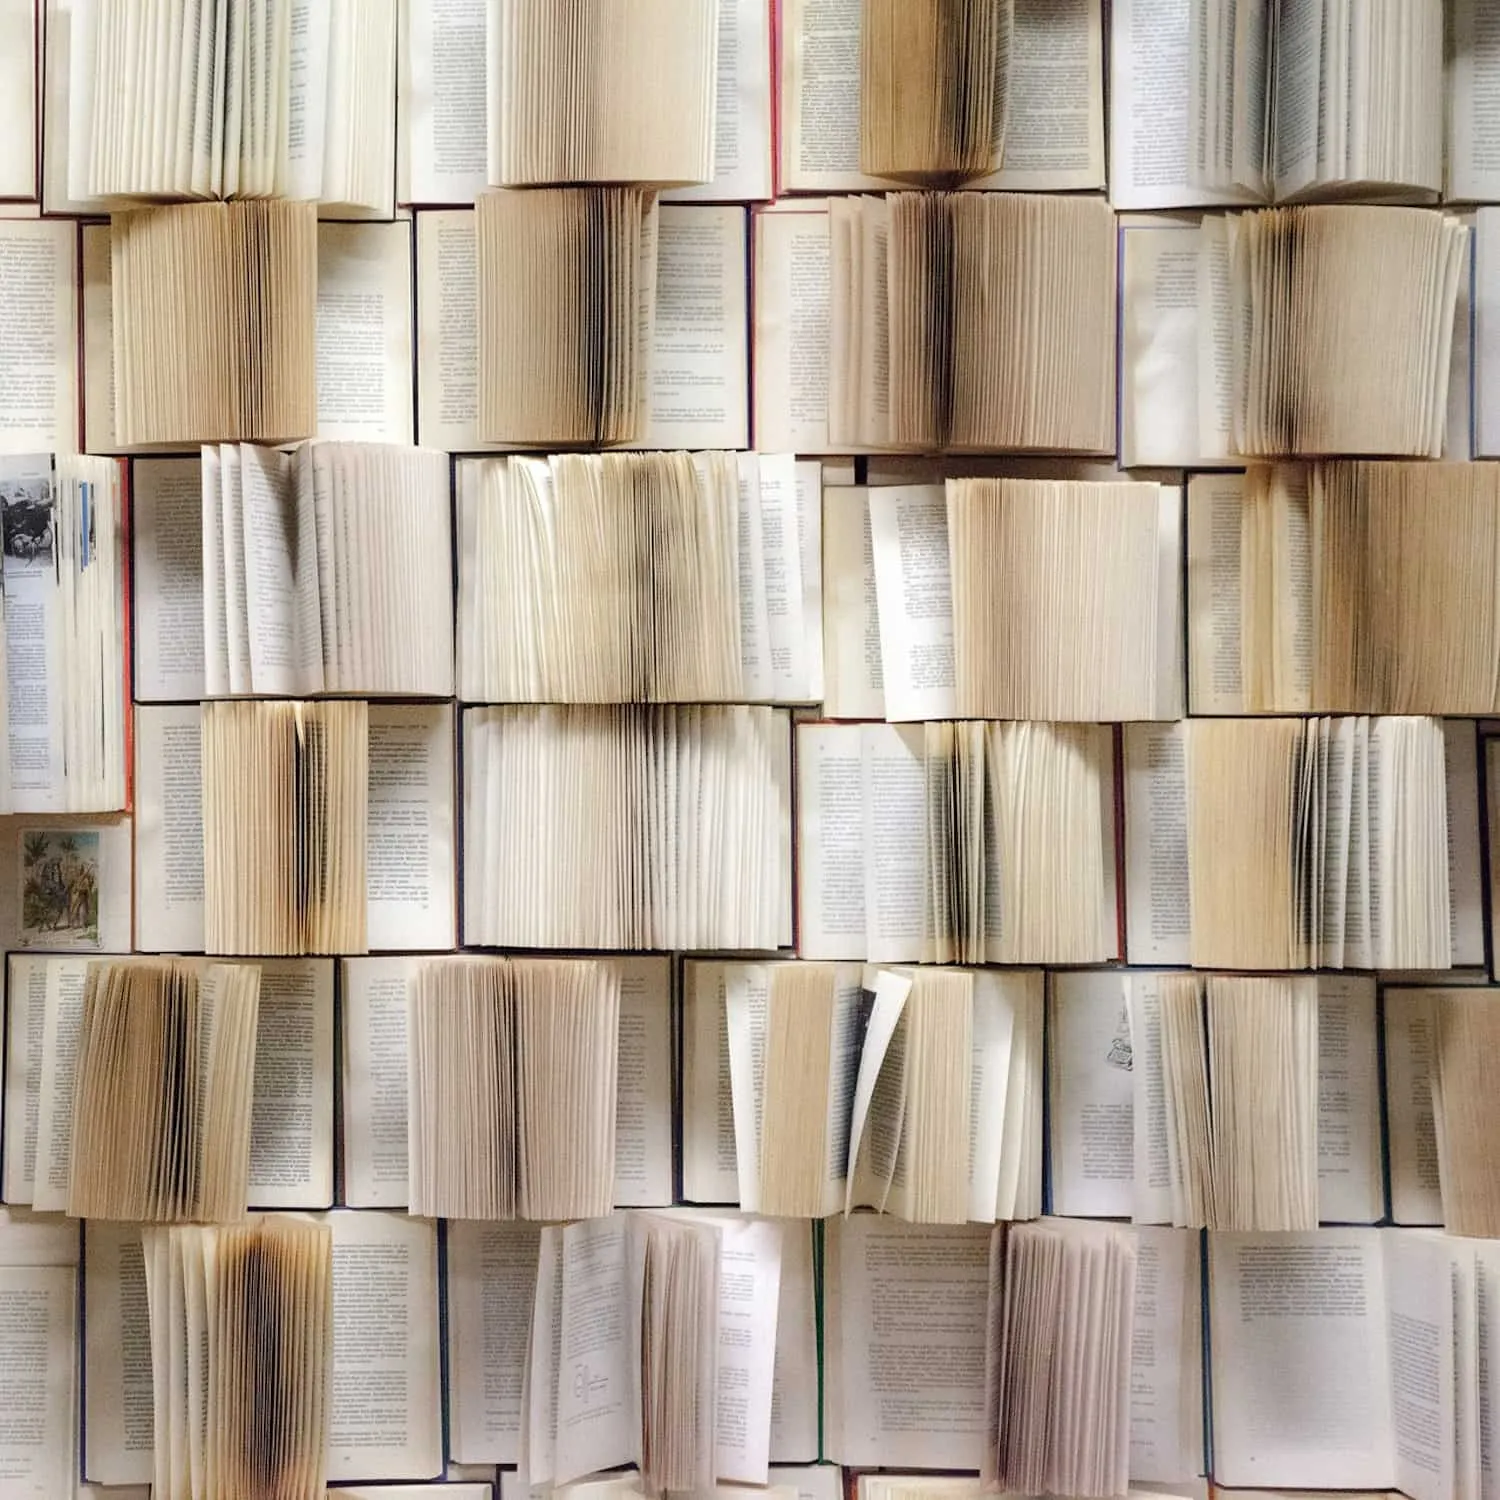 A wall of open books